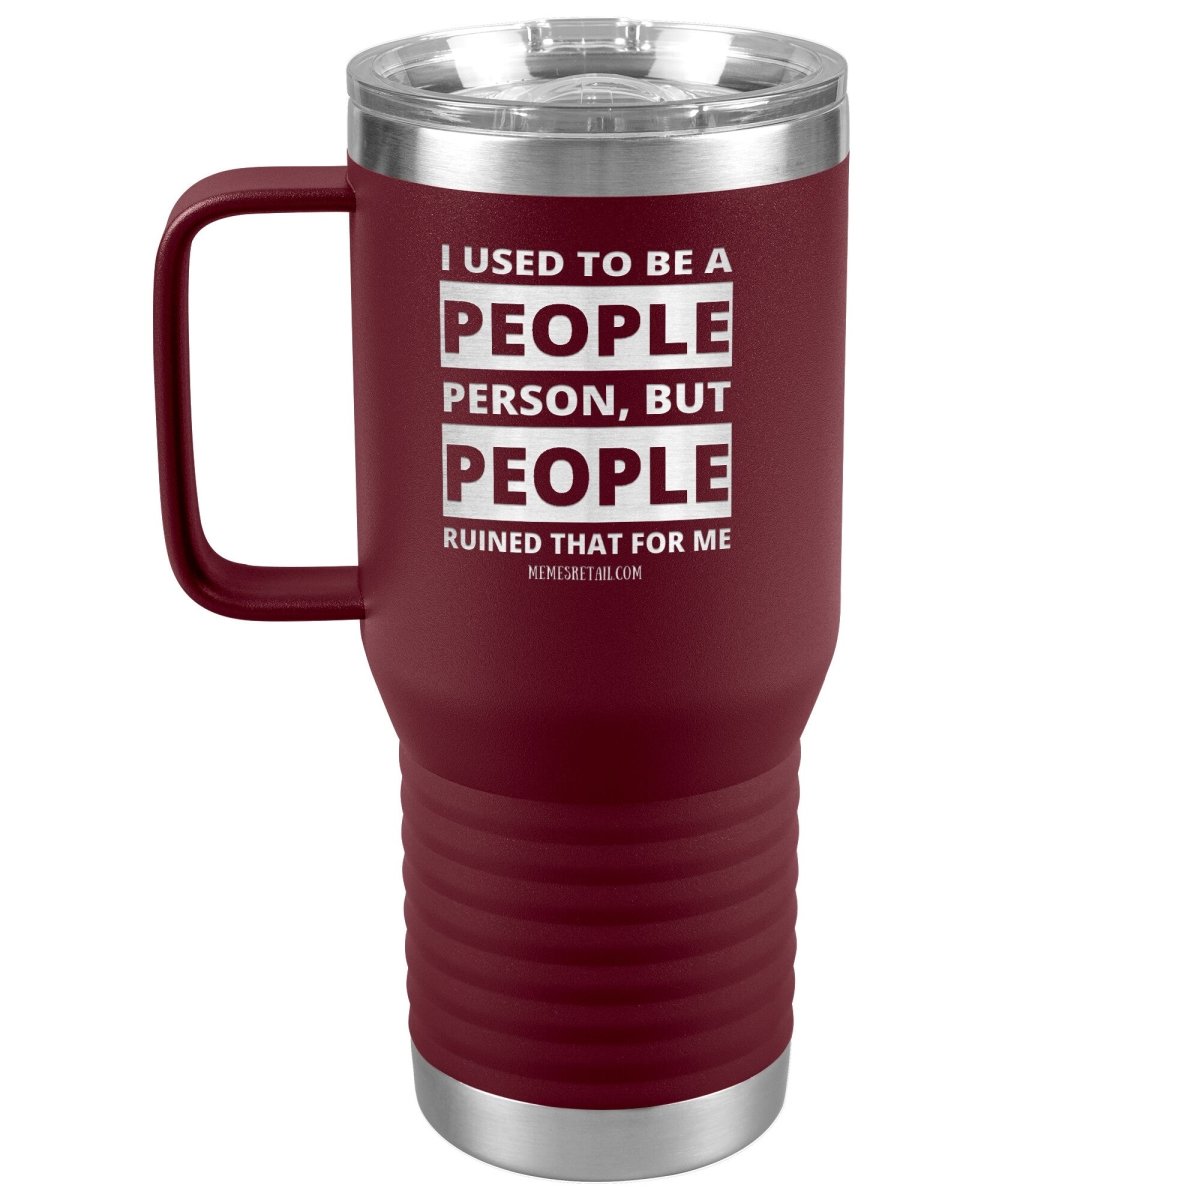 I Used To Be A People Person, But People Ruined That For Me Tumblers, 20oz Travel Tumbler / Maroon - MemesRetail.com